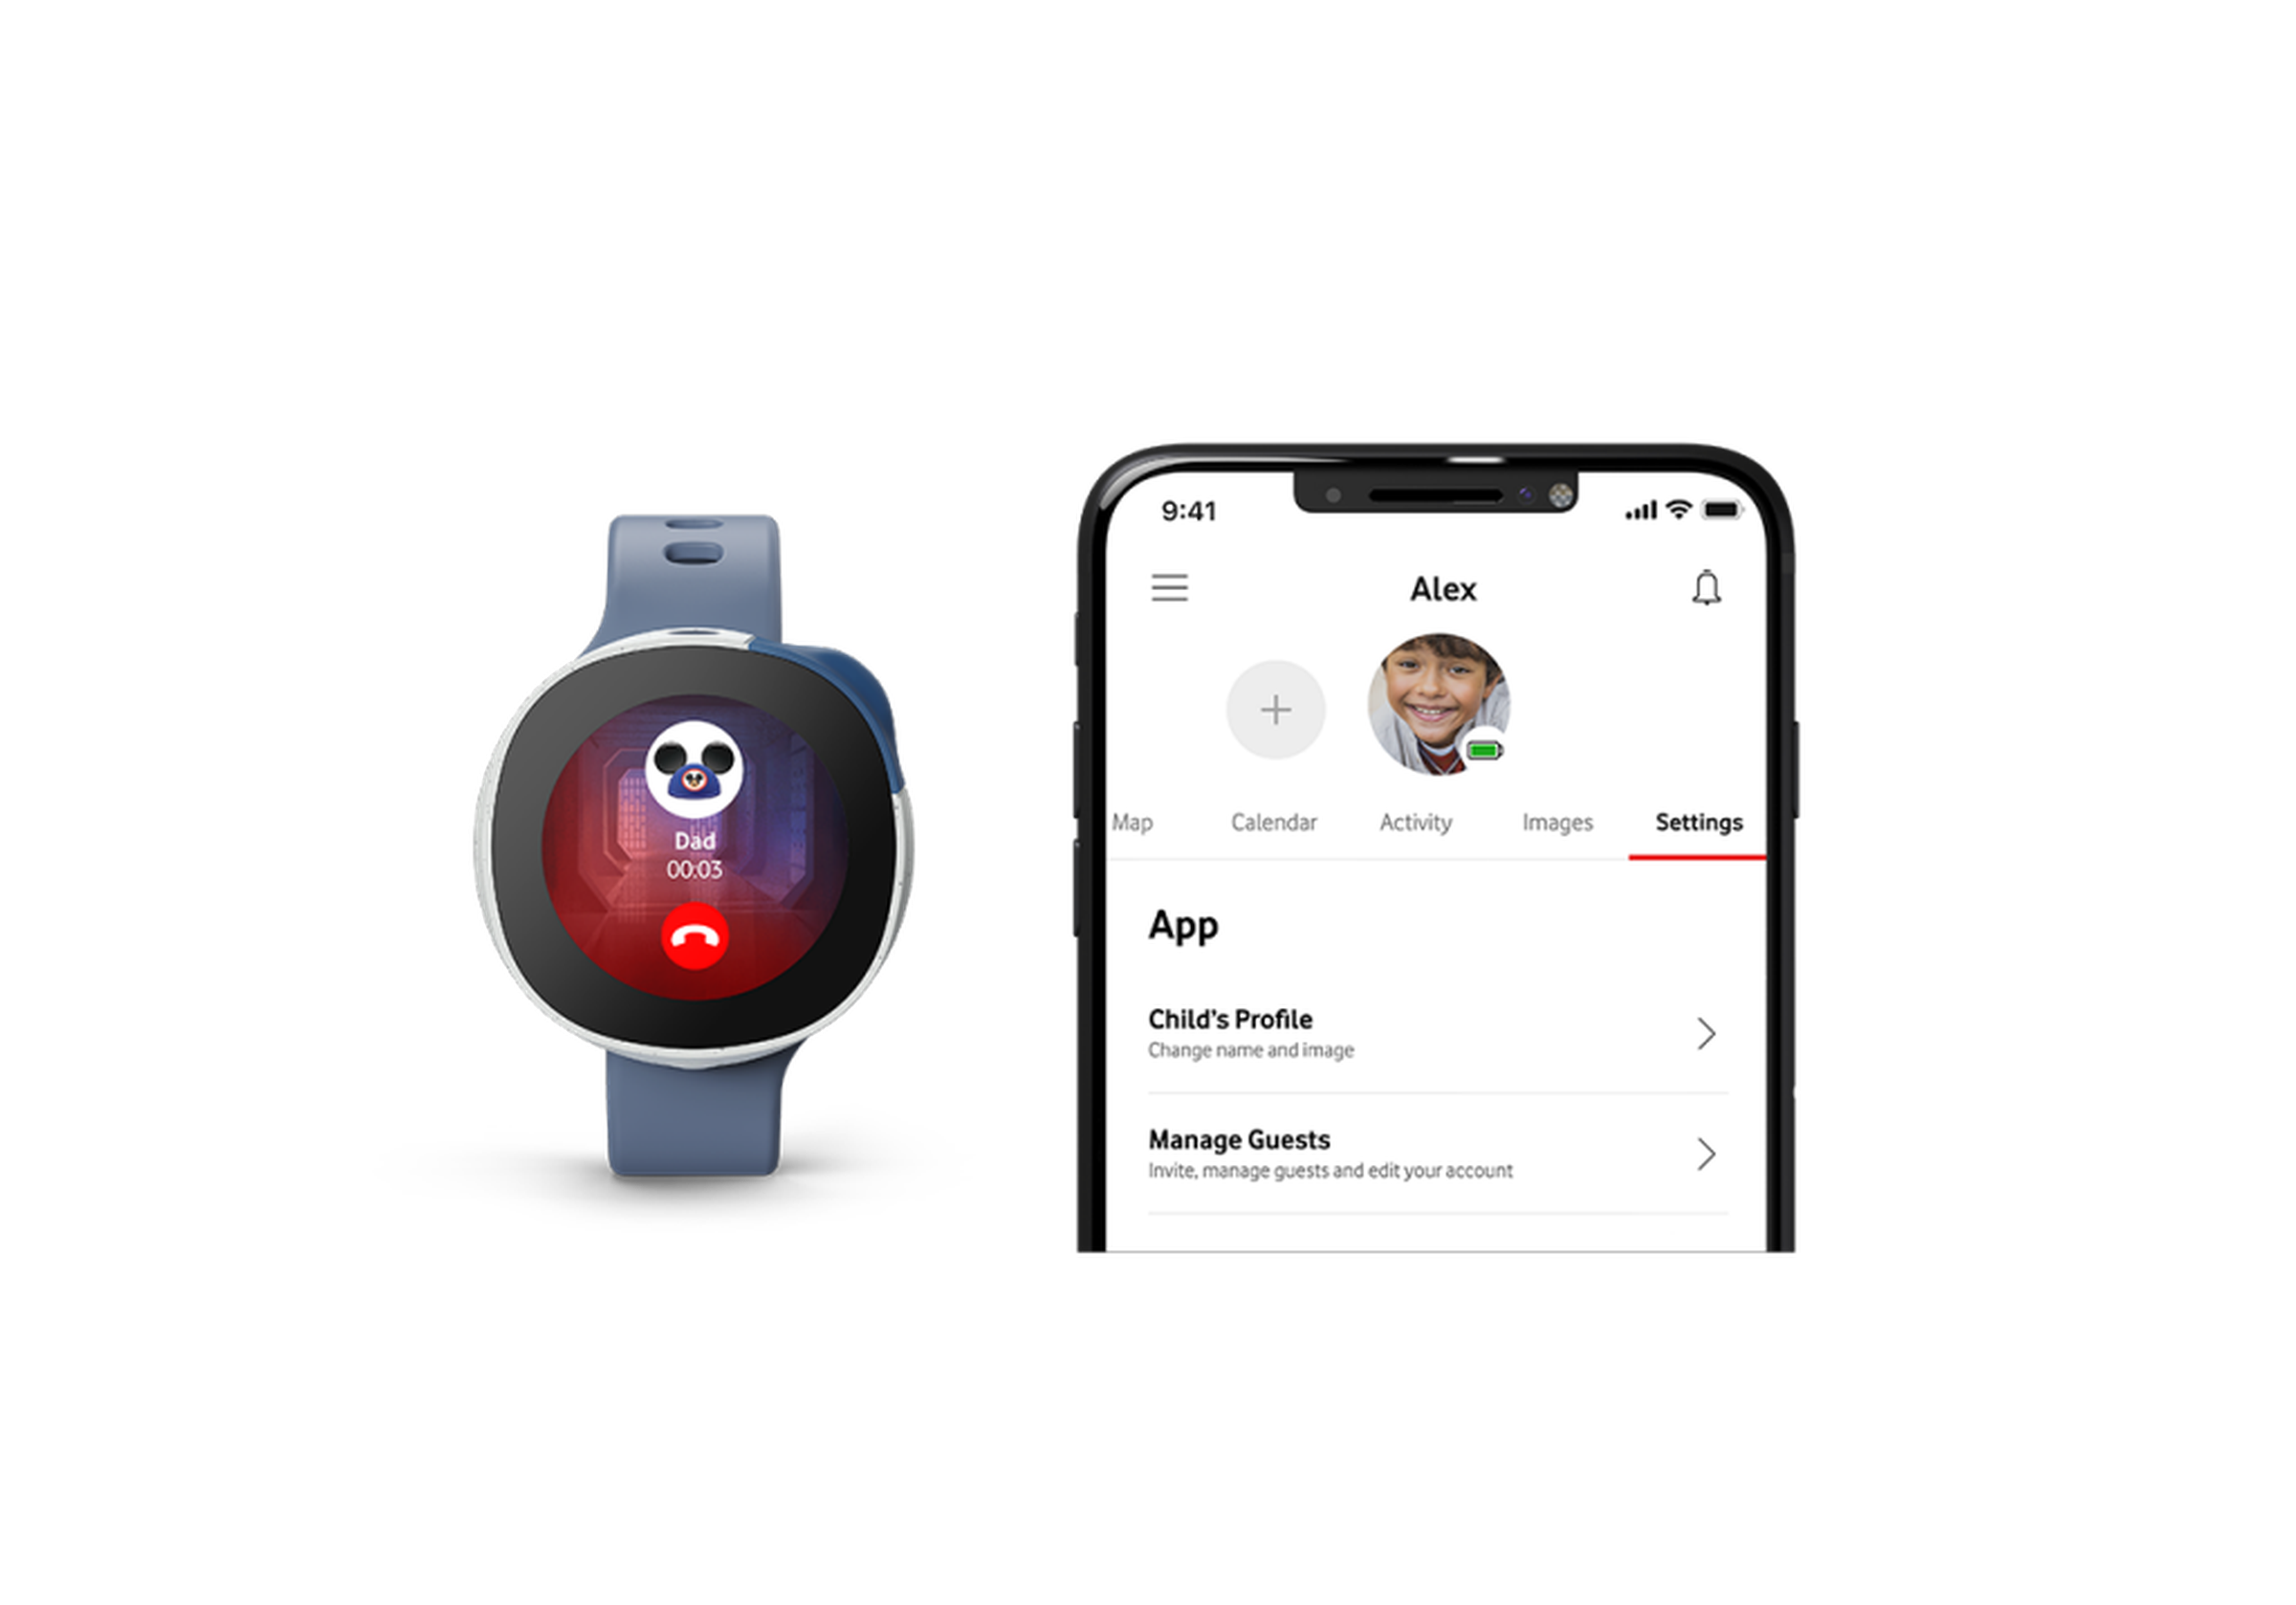 An example of the Neo smartwatch with the Vodafone Smart app for controlling privacy settings.